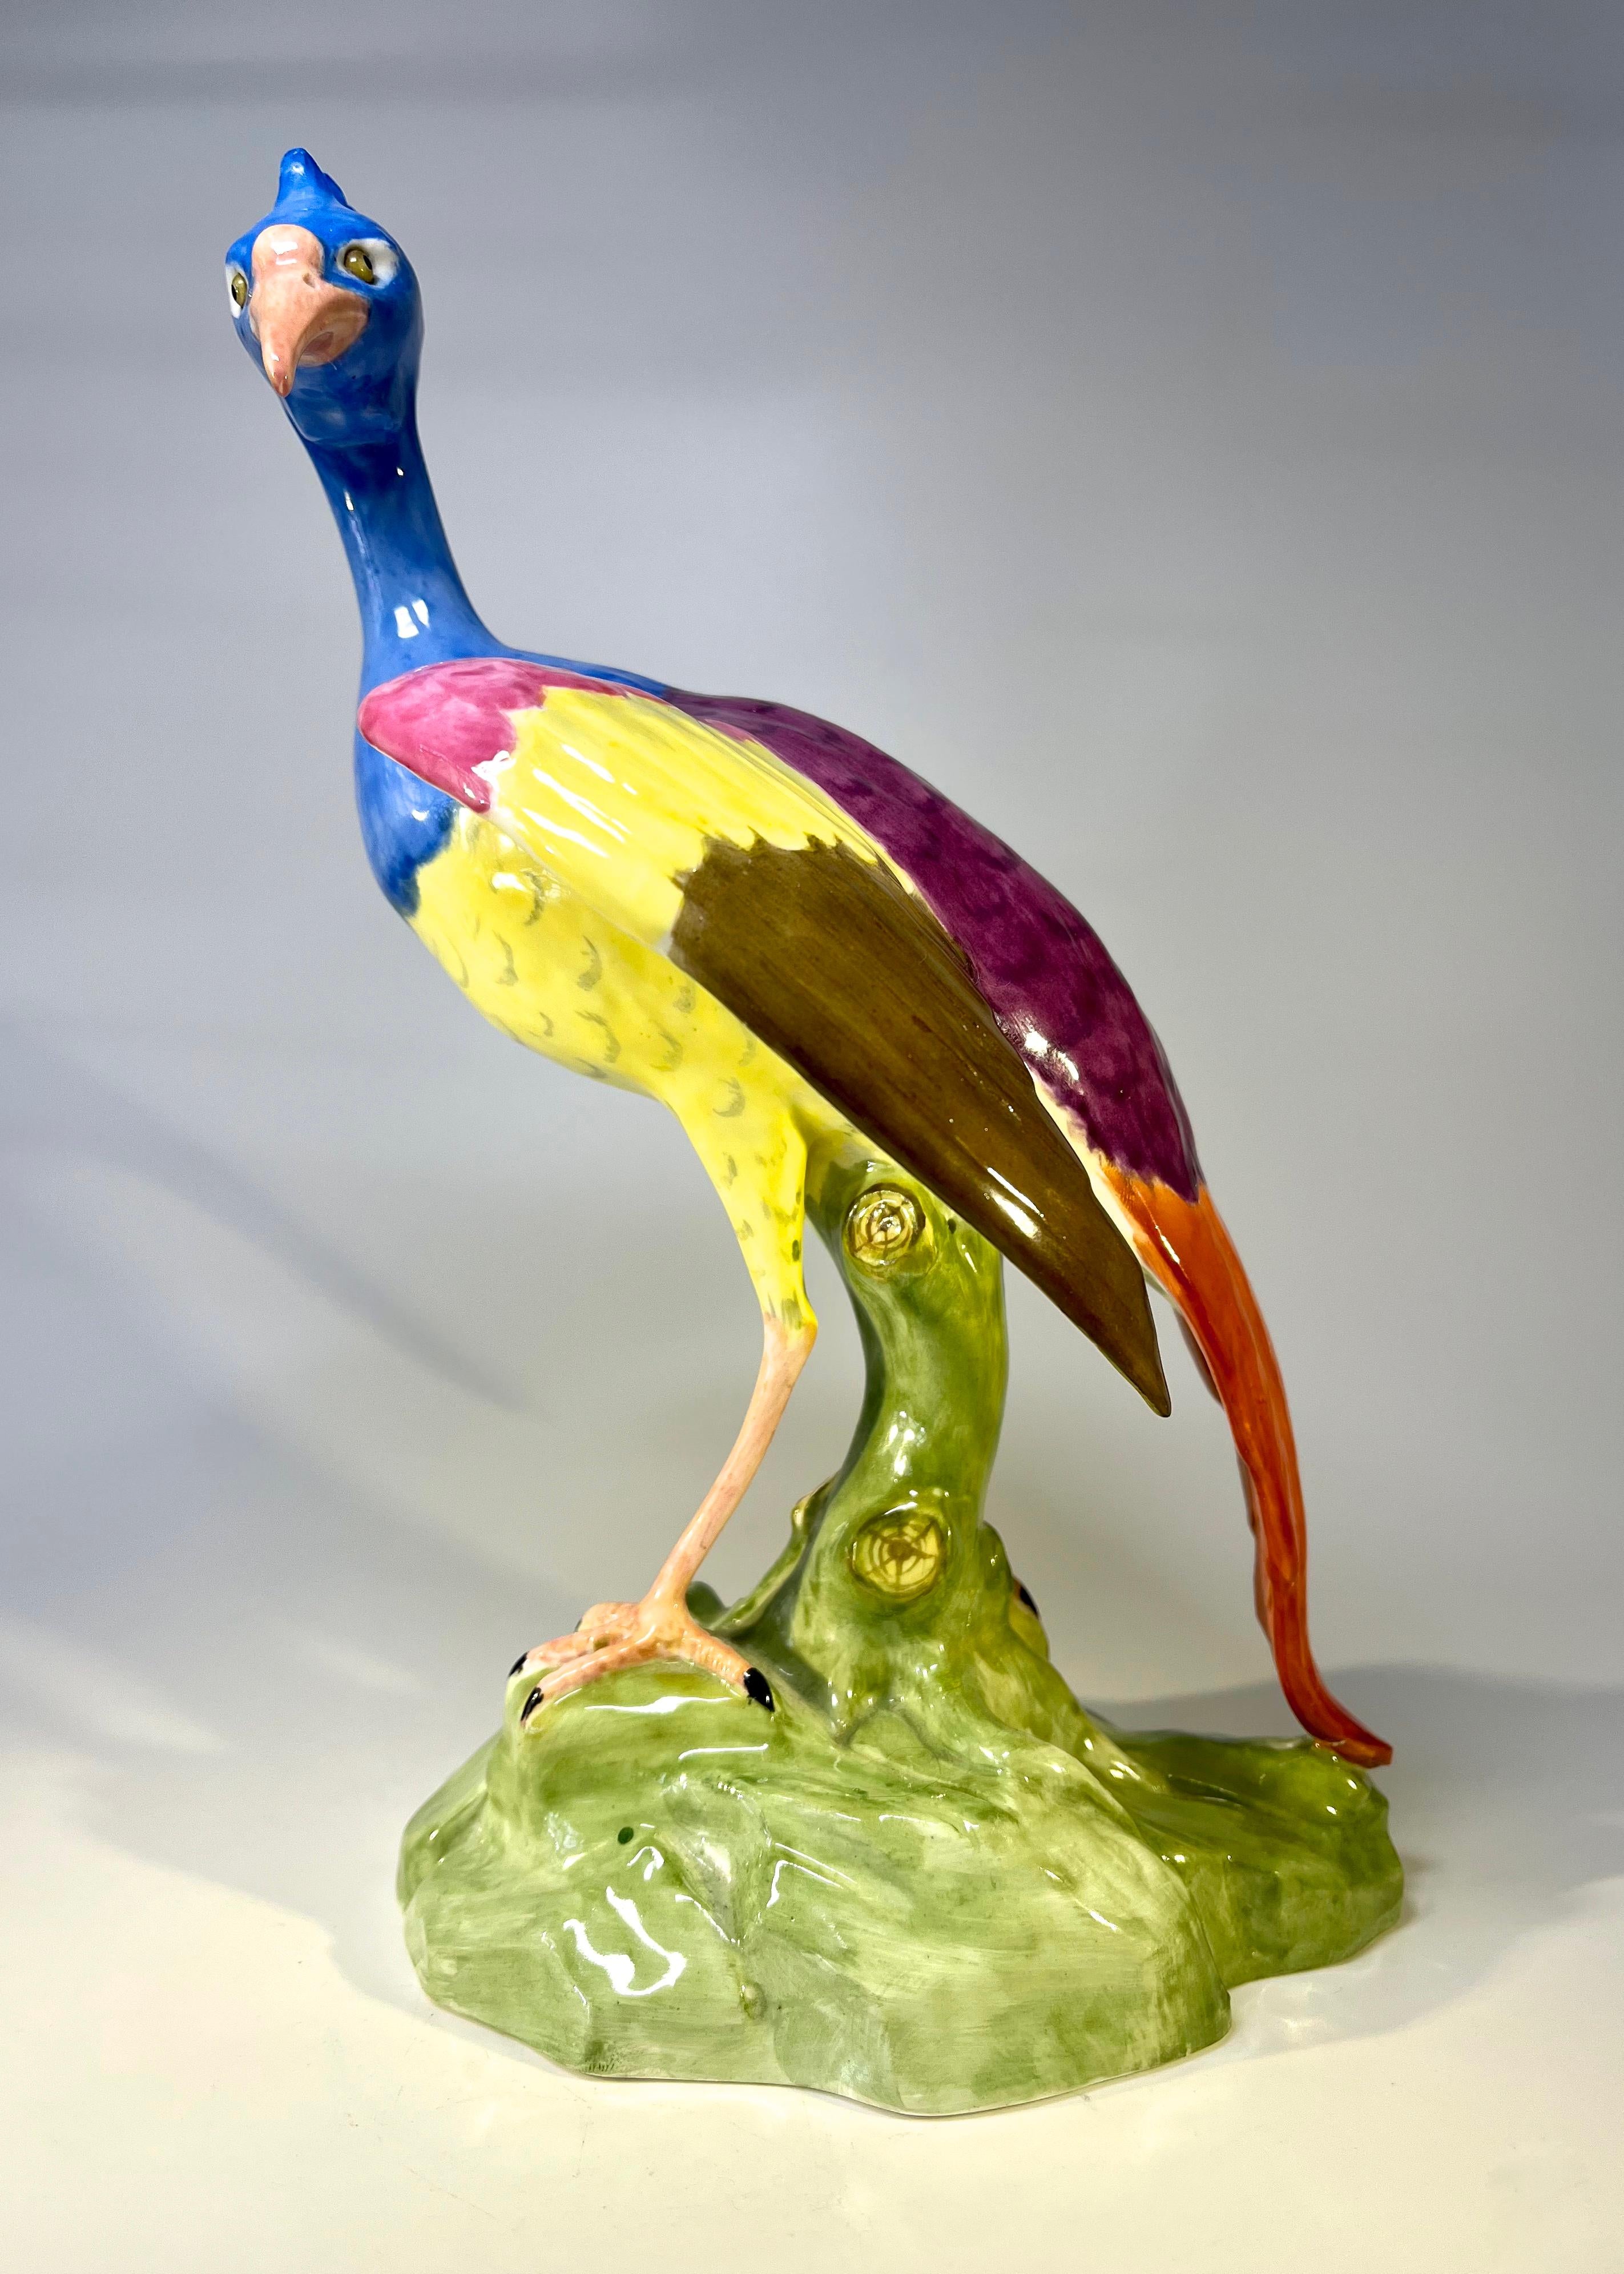 A magnificent and eccentric bone china Chelsea Fantasy Bird by Copeland, Spode, inspired by Meissen originals
The artist had free range regarding colours - resulting in this fantastic piece
English Bone China
Circa 1915-1920 Verified by the Spode